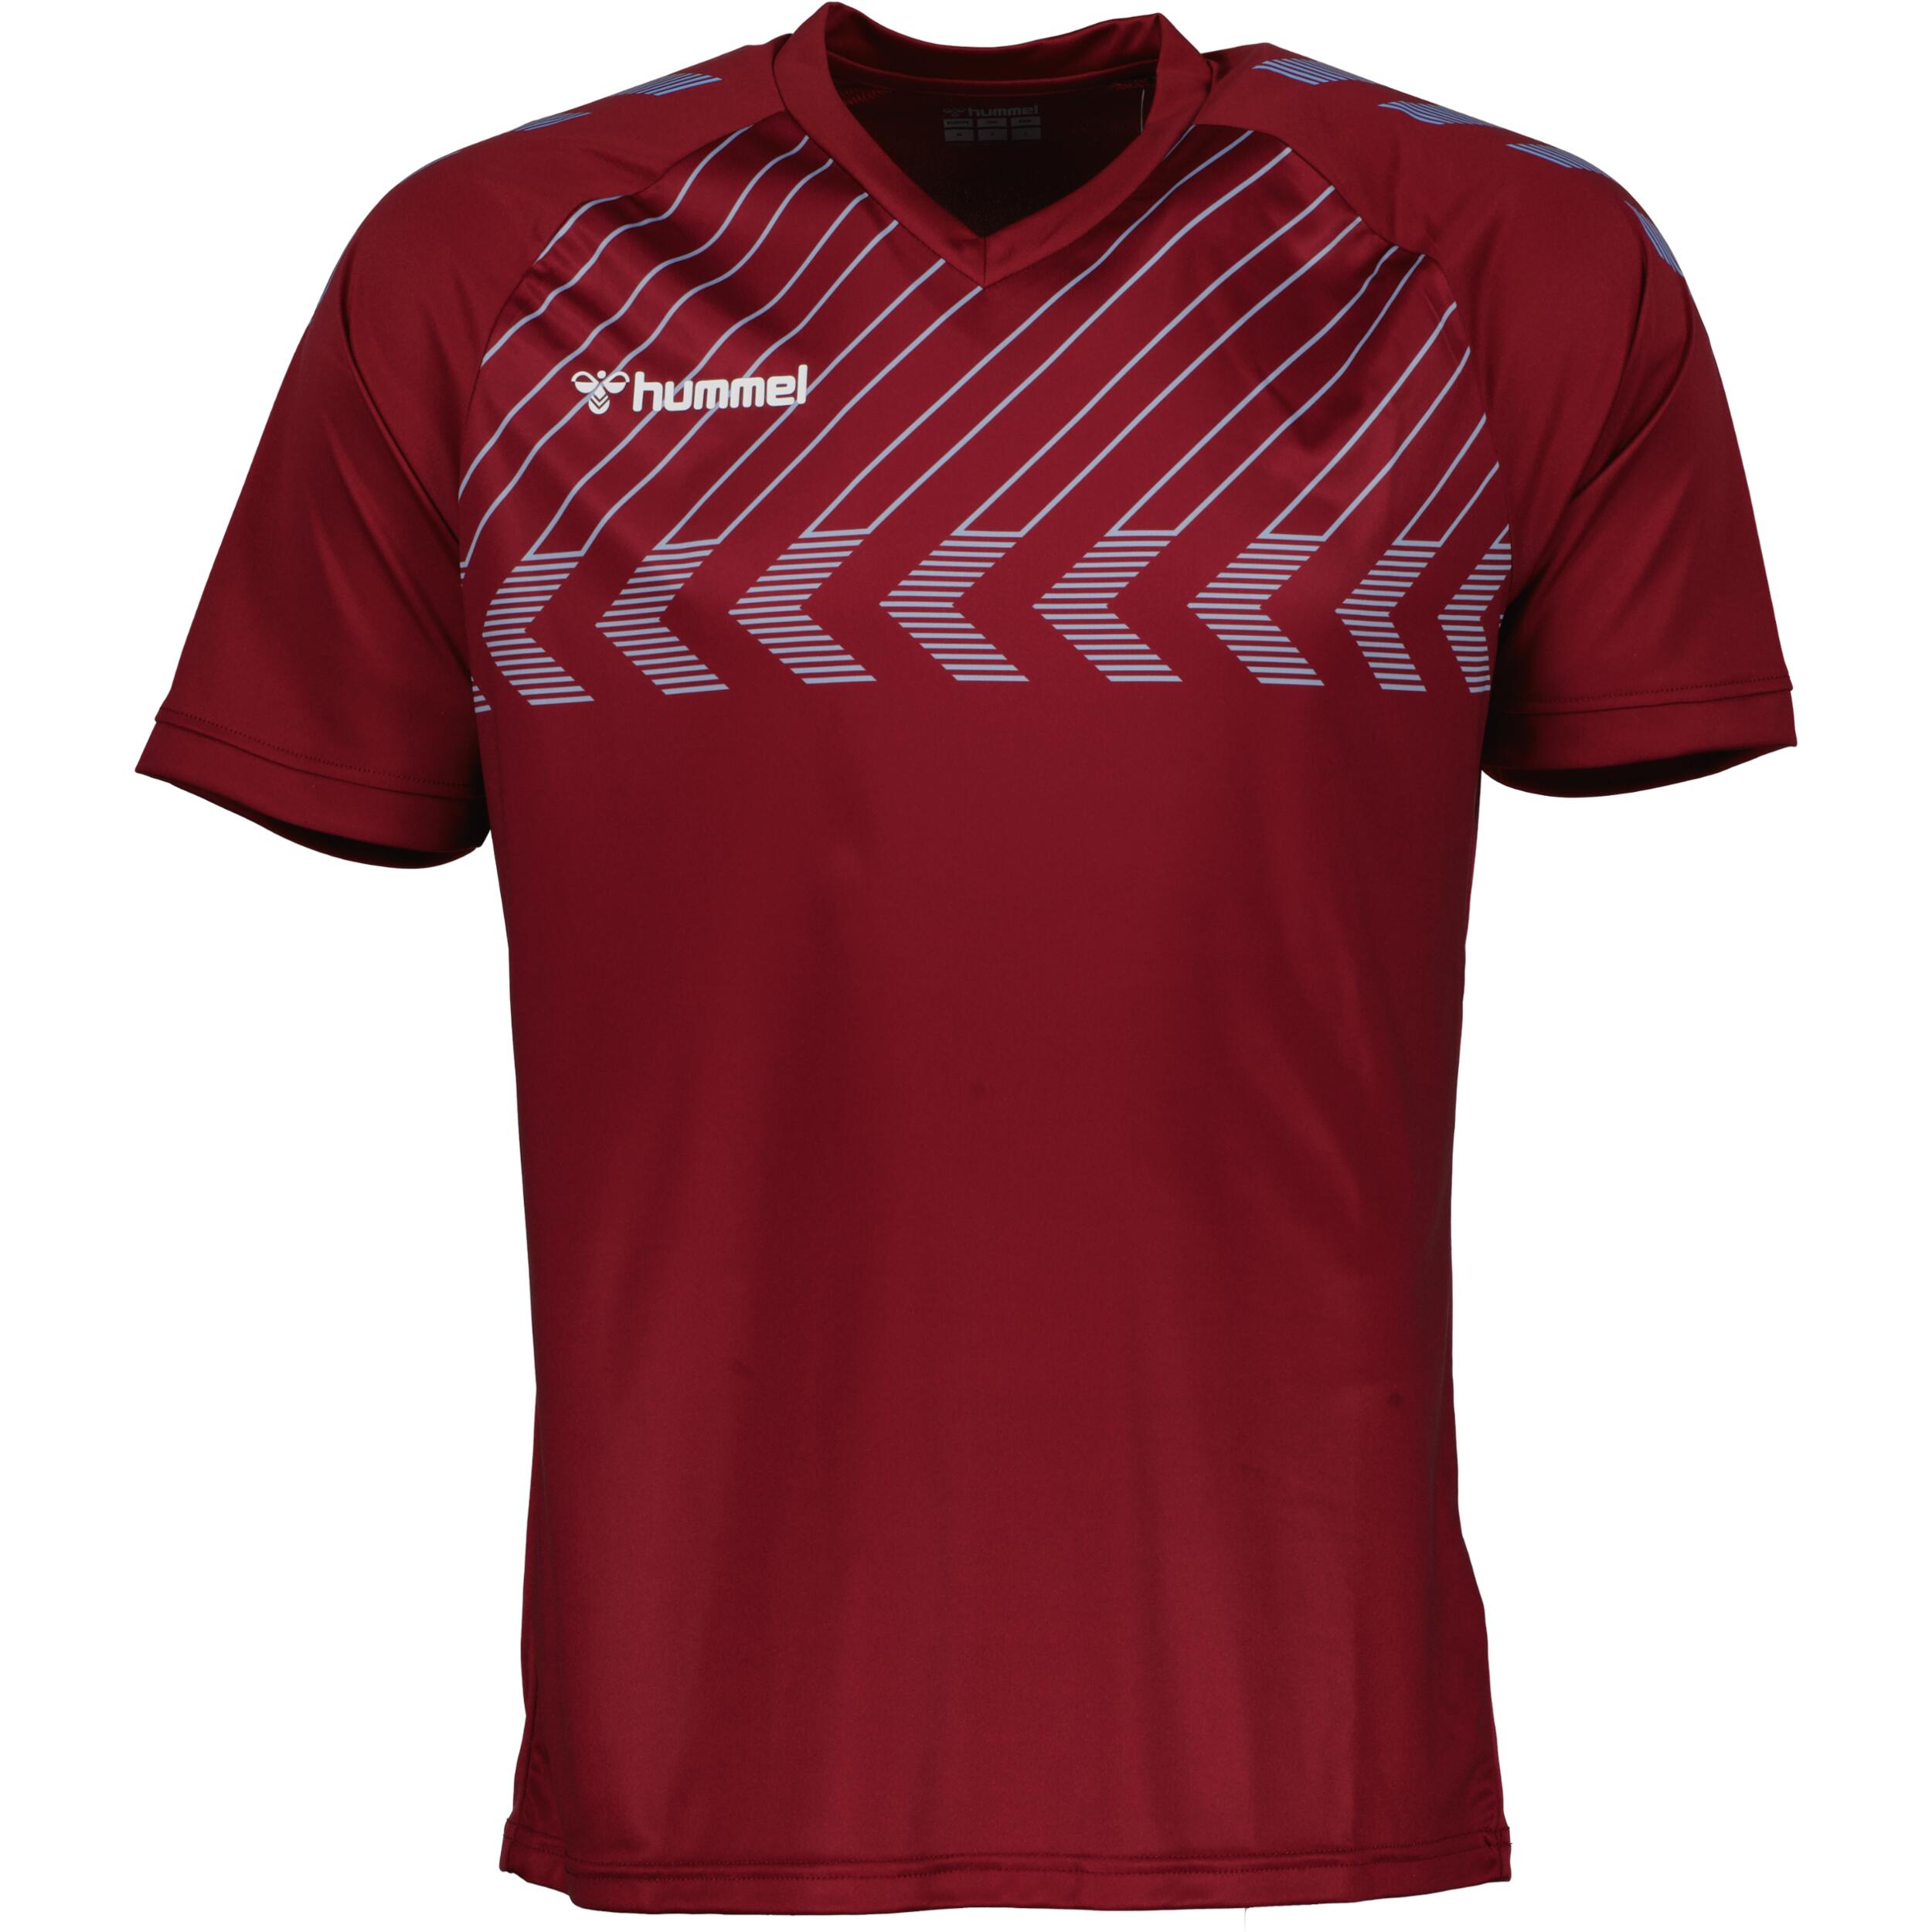 HUMMEL Poly jersey for men, great for football, in maroon